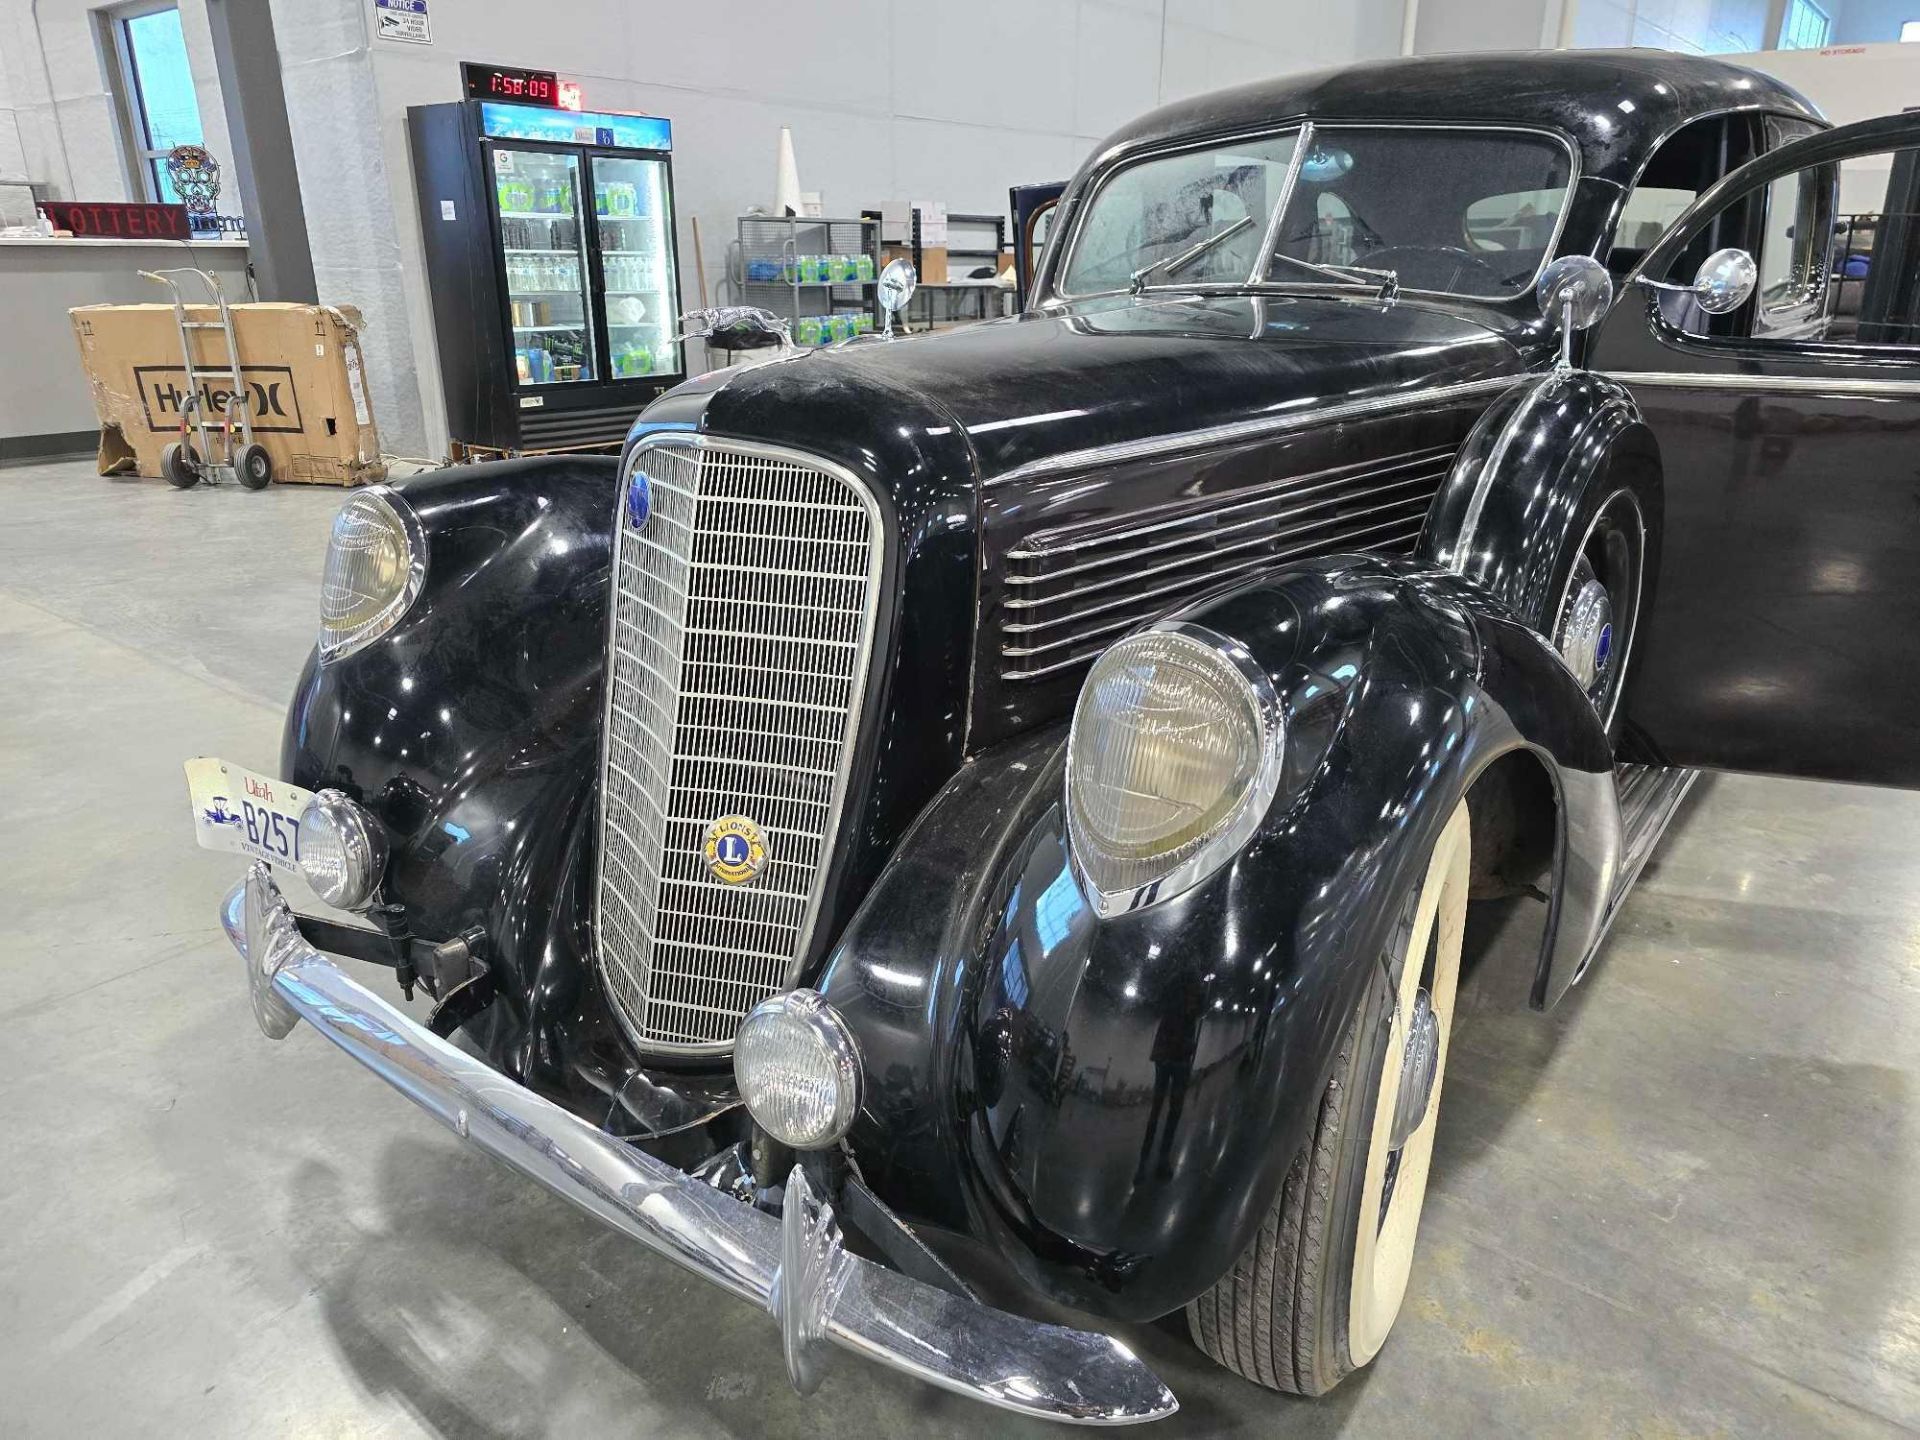 1938 Lincoln Model K v12 (last ran 4 years ago, we believe it needs new gas and a battery)  VIN #K91 - Image 37 of 37